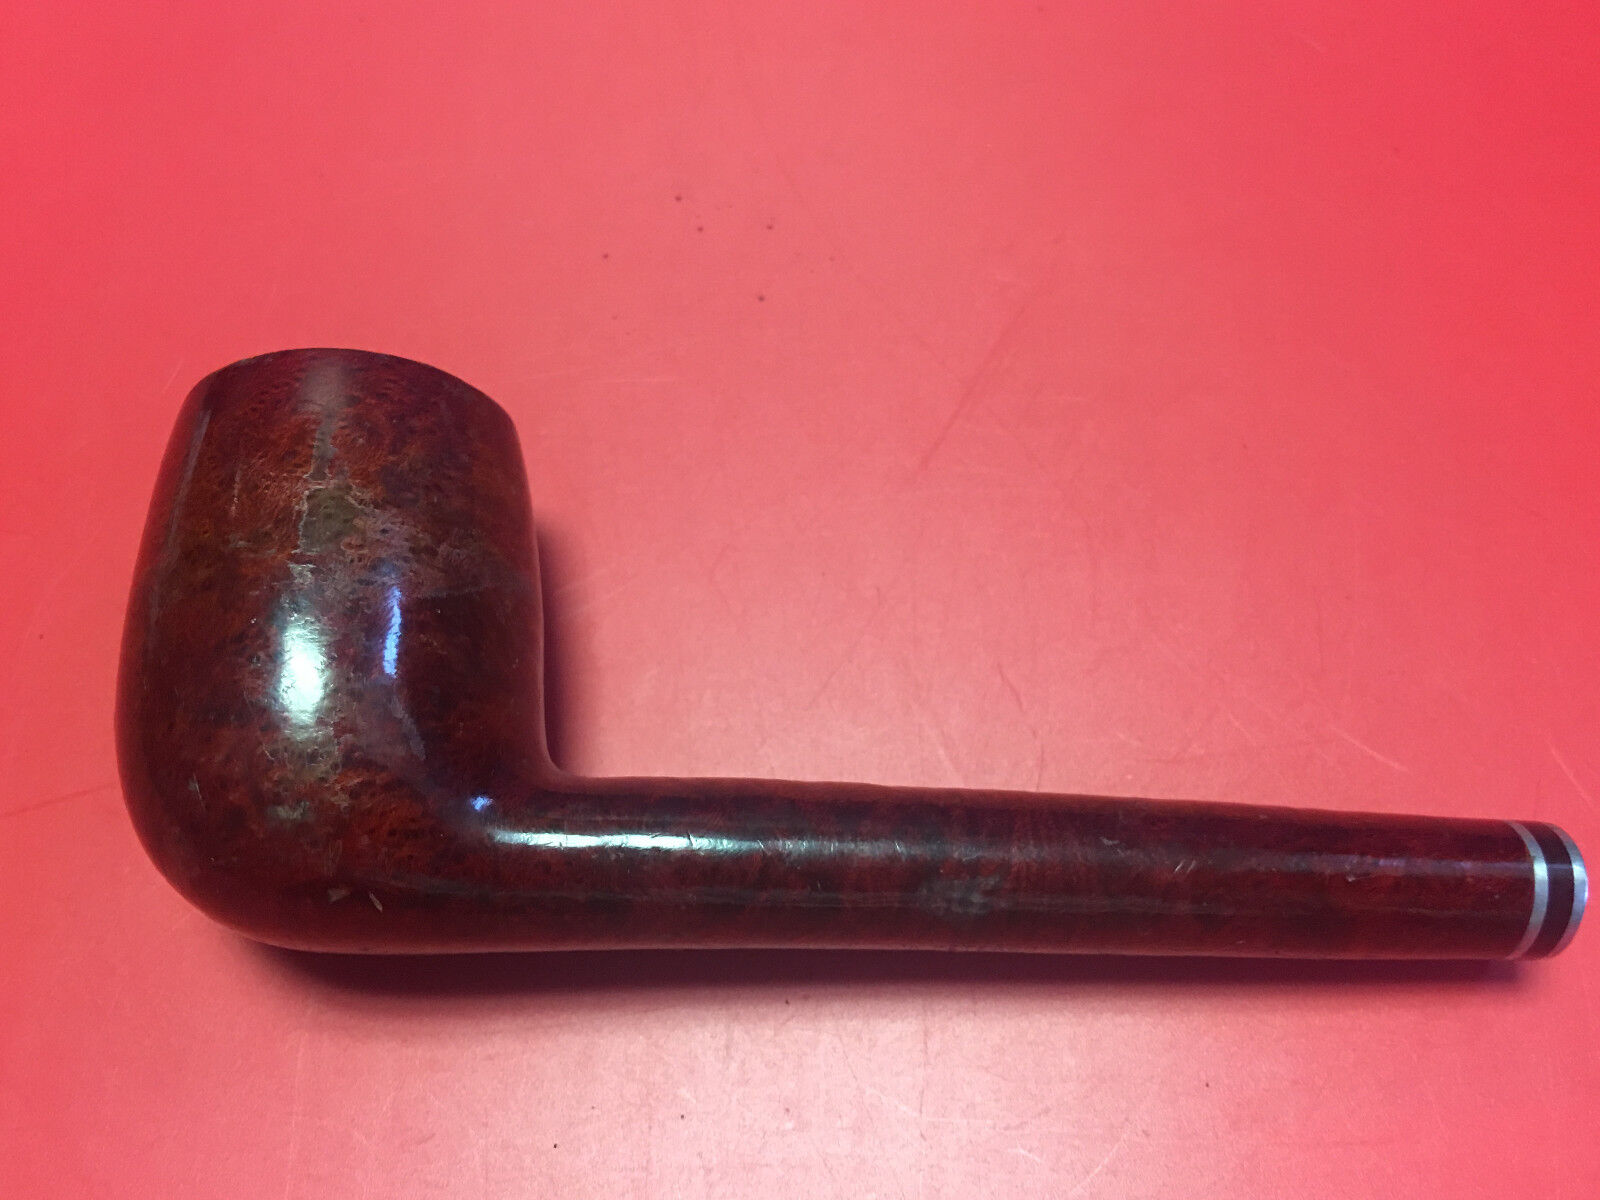 Vtg Peterson Product Made in Republic of Ireland Smoking Tobacco Pipe #264